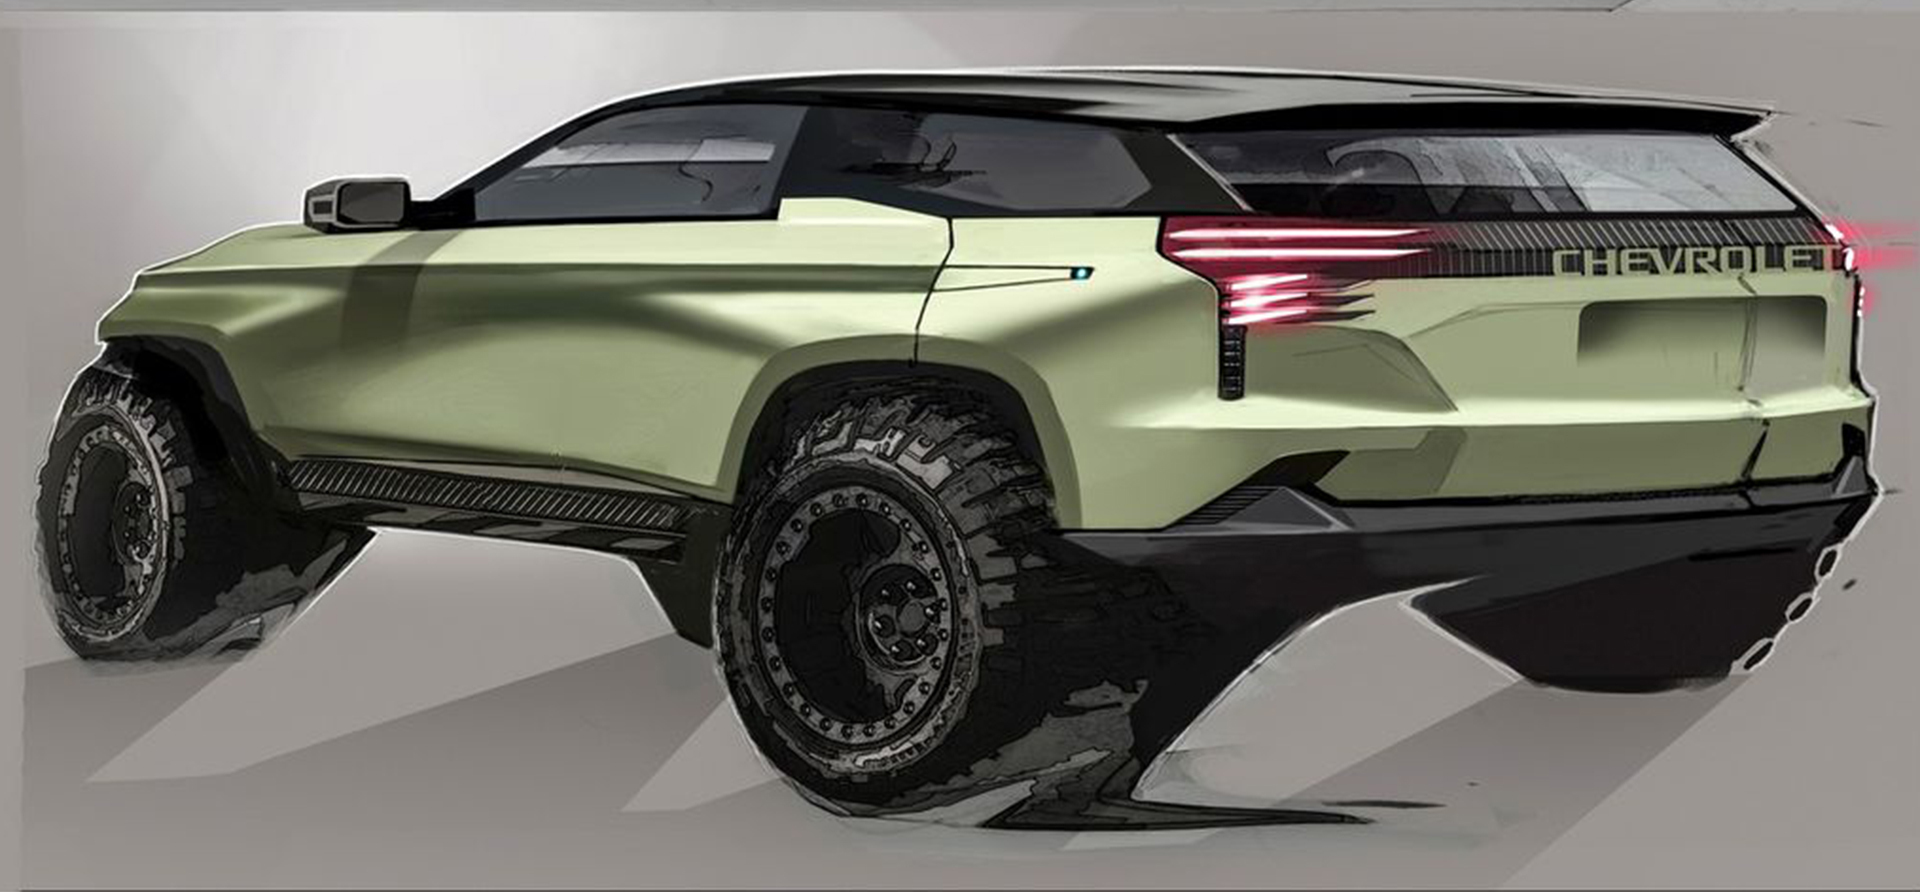 Would You Buy A Modern Chevy K5 Blazer That Looks Like This?